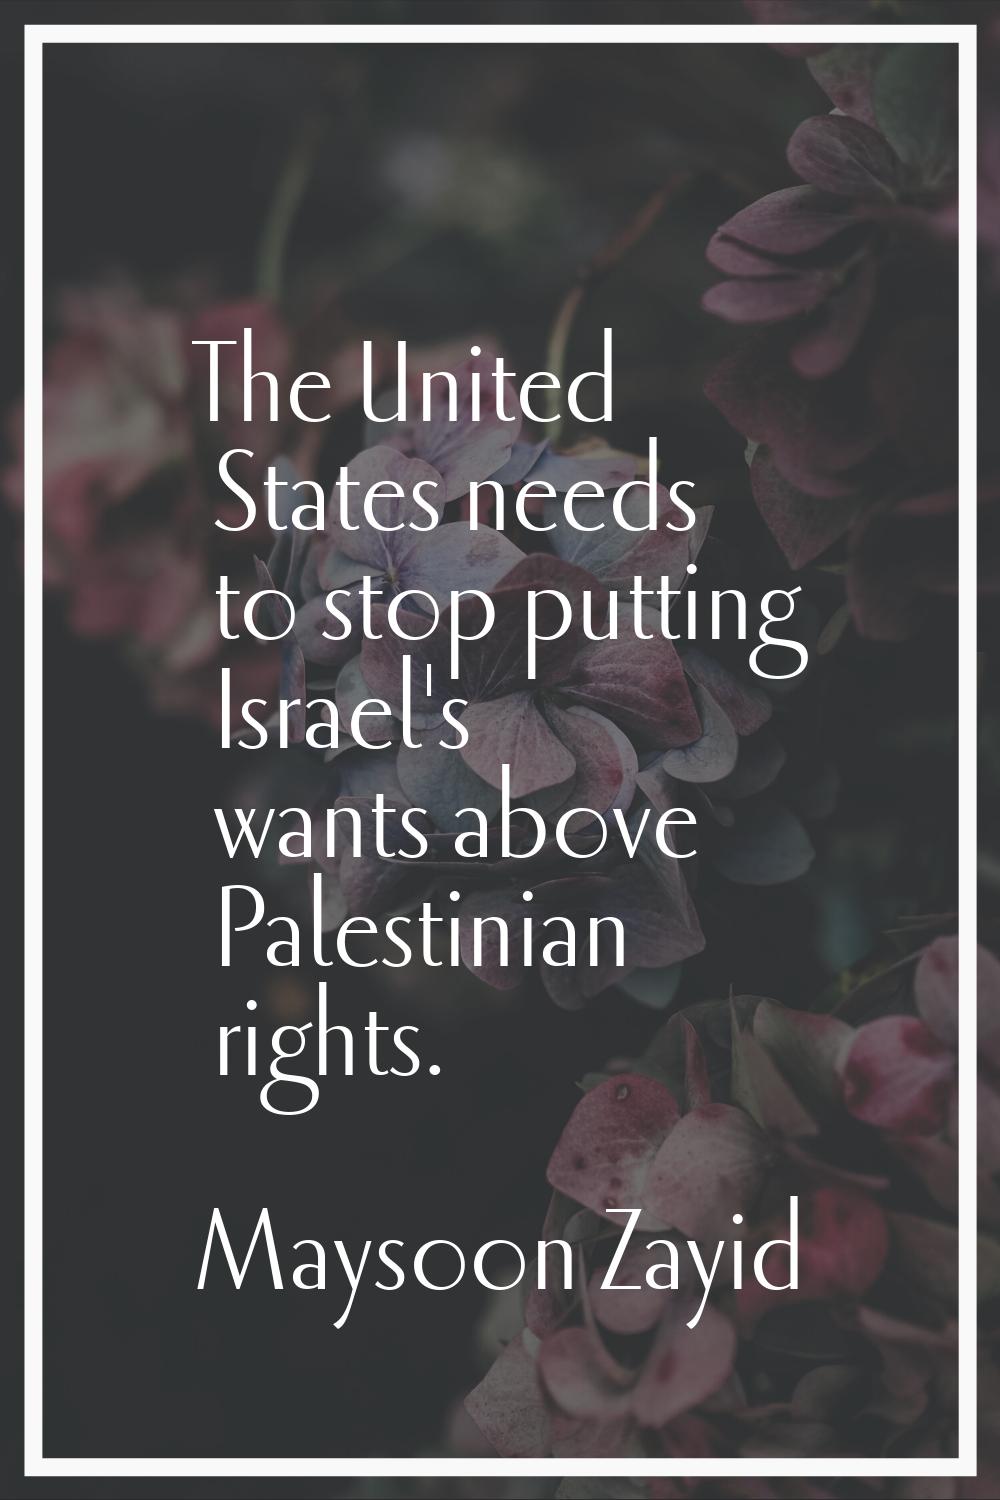 The United States needs to stop putting Israel's wants above Palestinian rights.